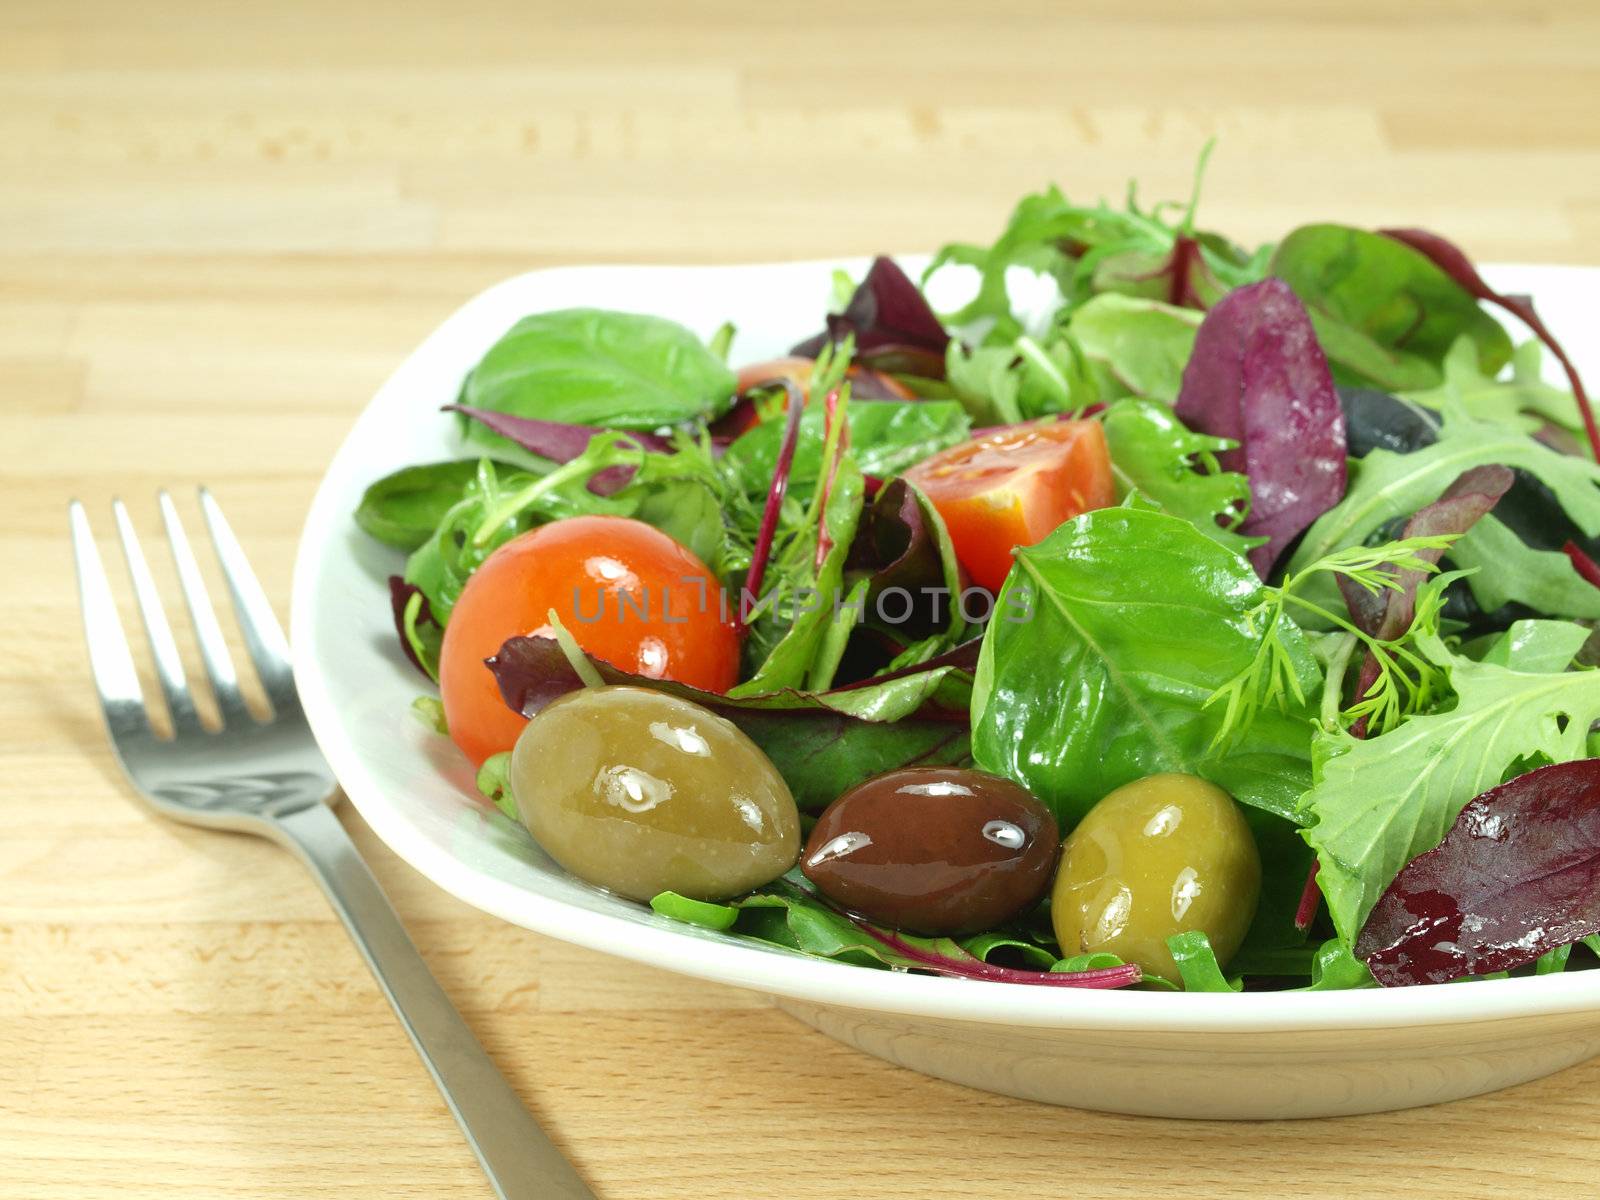 mixed baby green salad dressed with olive oil     